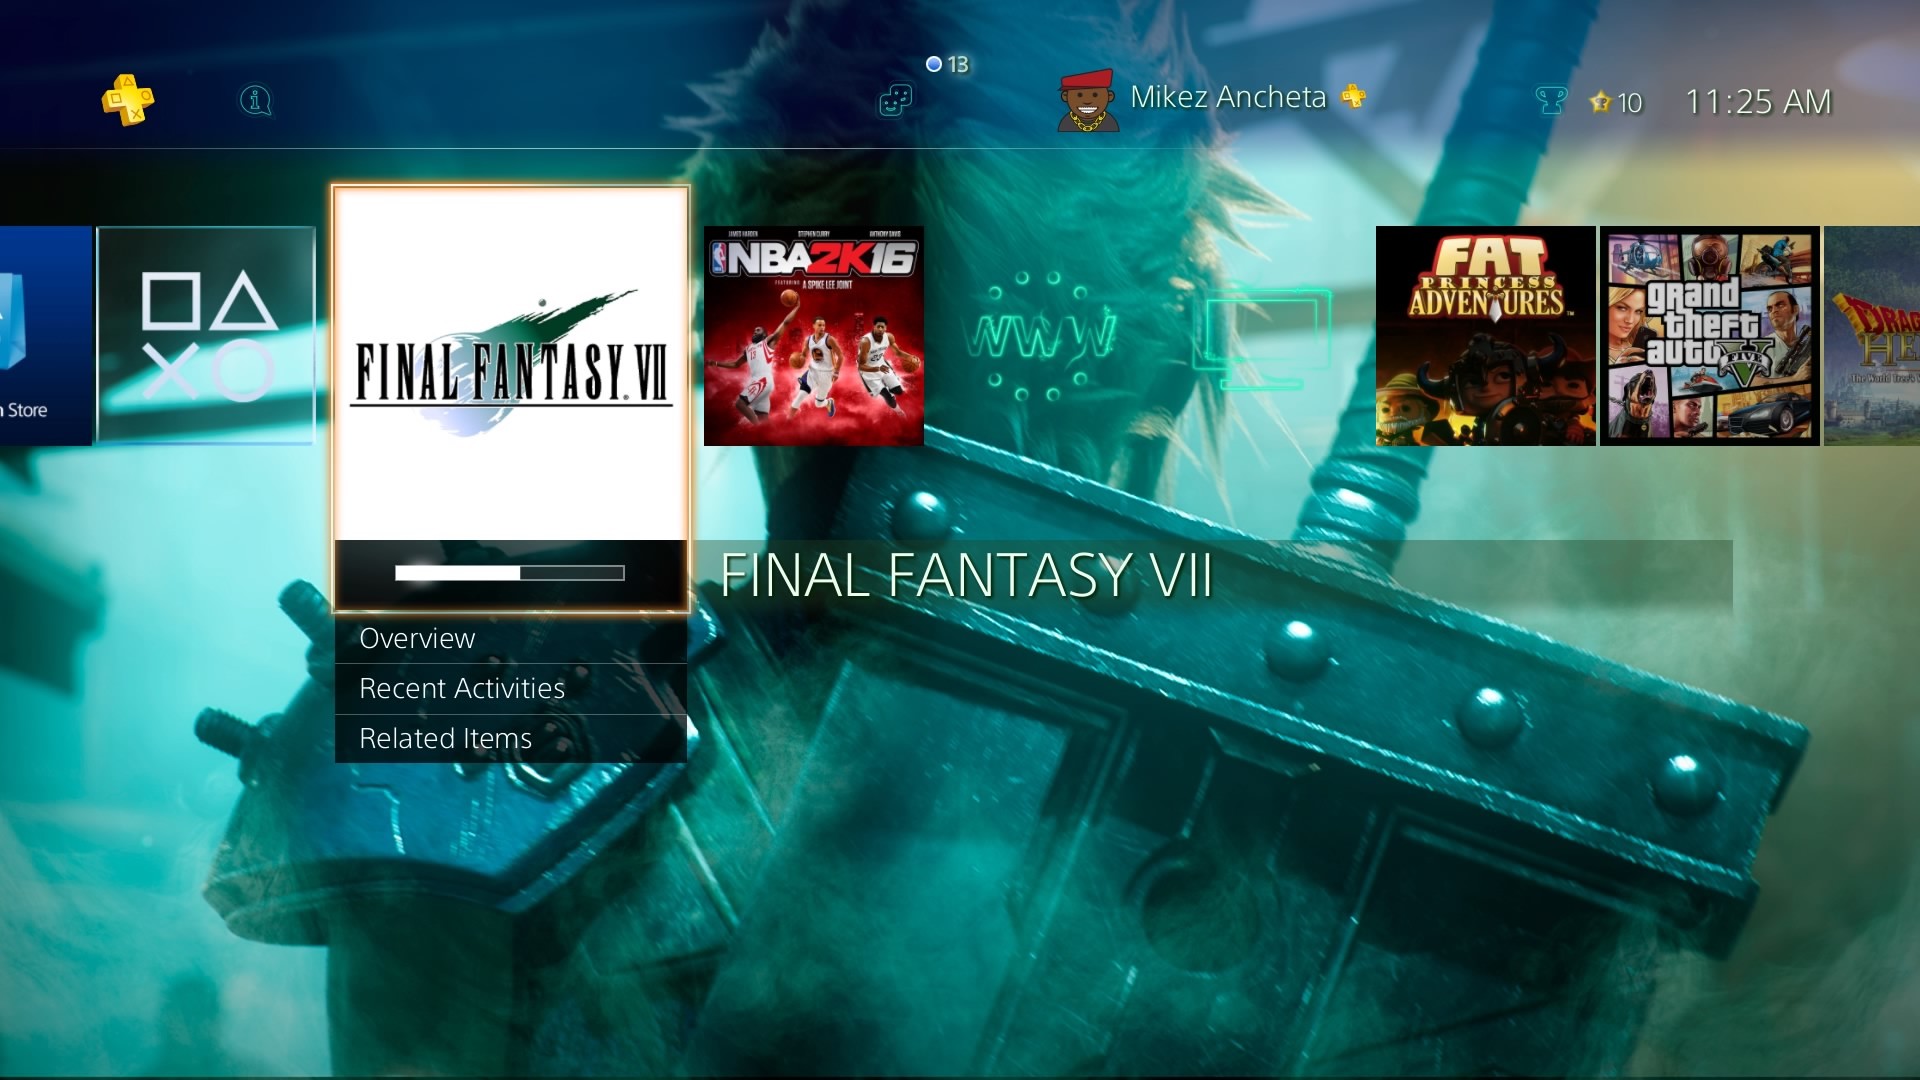 1920x1080 You will also get a cool Midgar PS4 theme with nice wallpaper and a  nostalgic Midgar background music and FF7 click sounds.